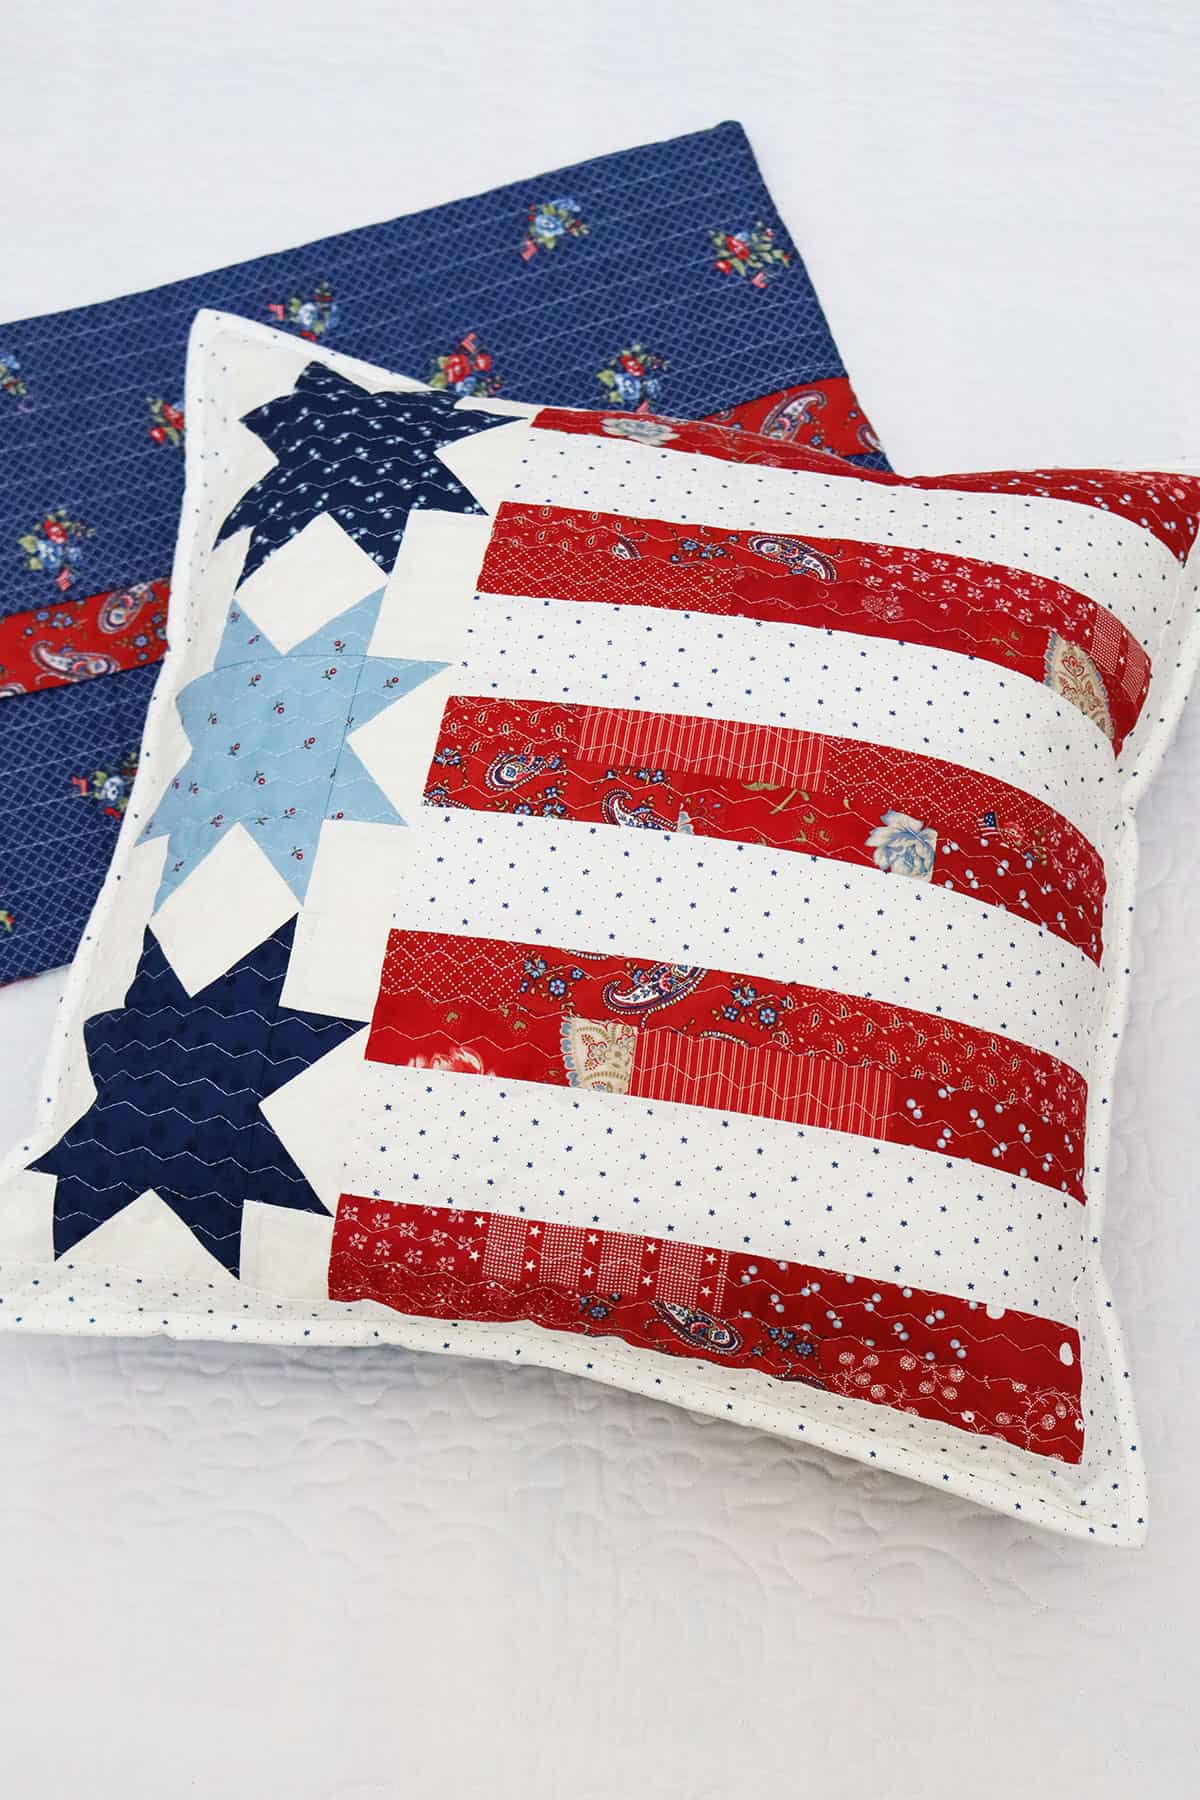 4th of July Pillows featured by Top US Quilt Blog, A Quilting Life